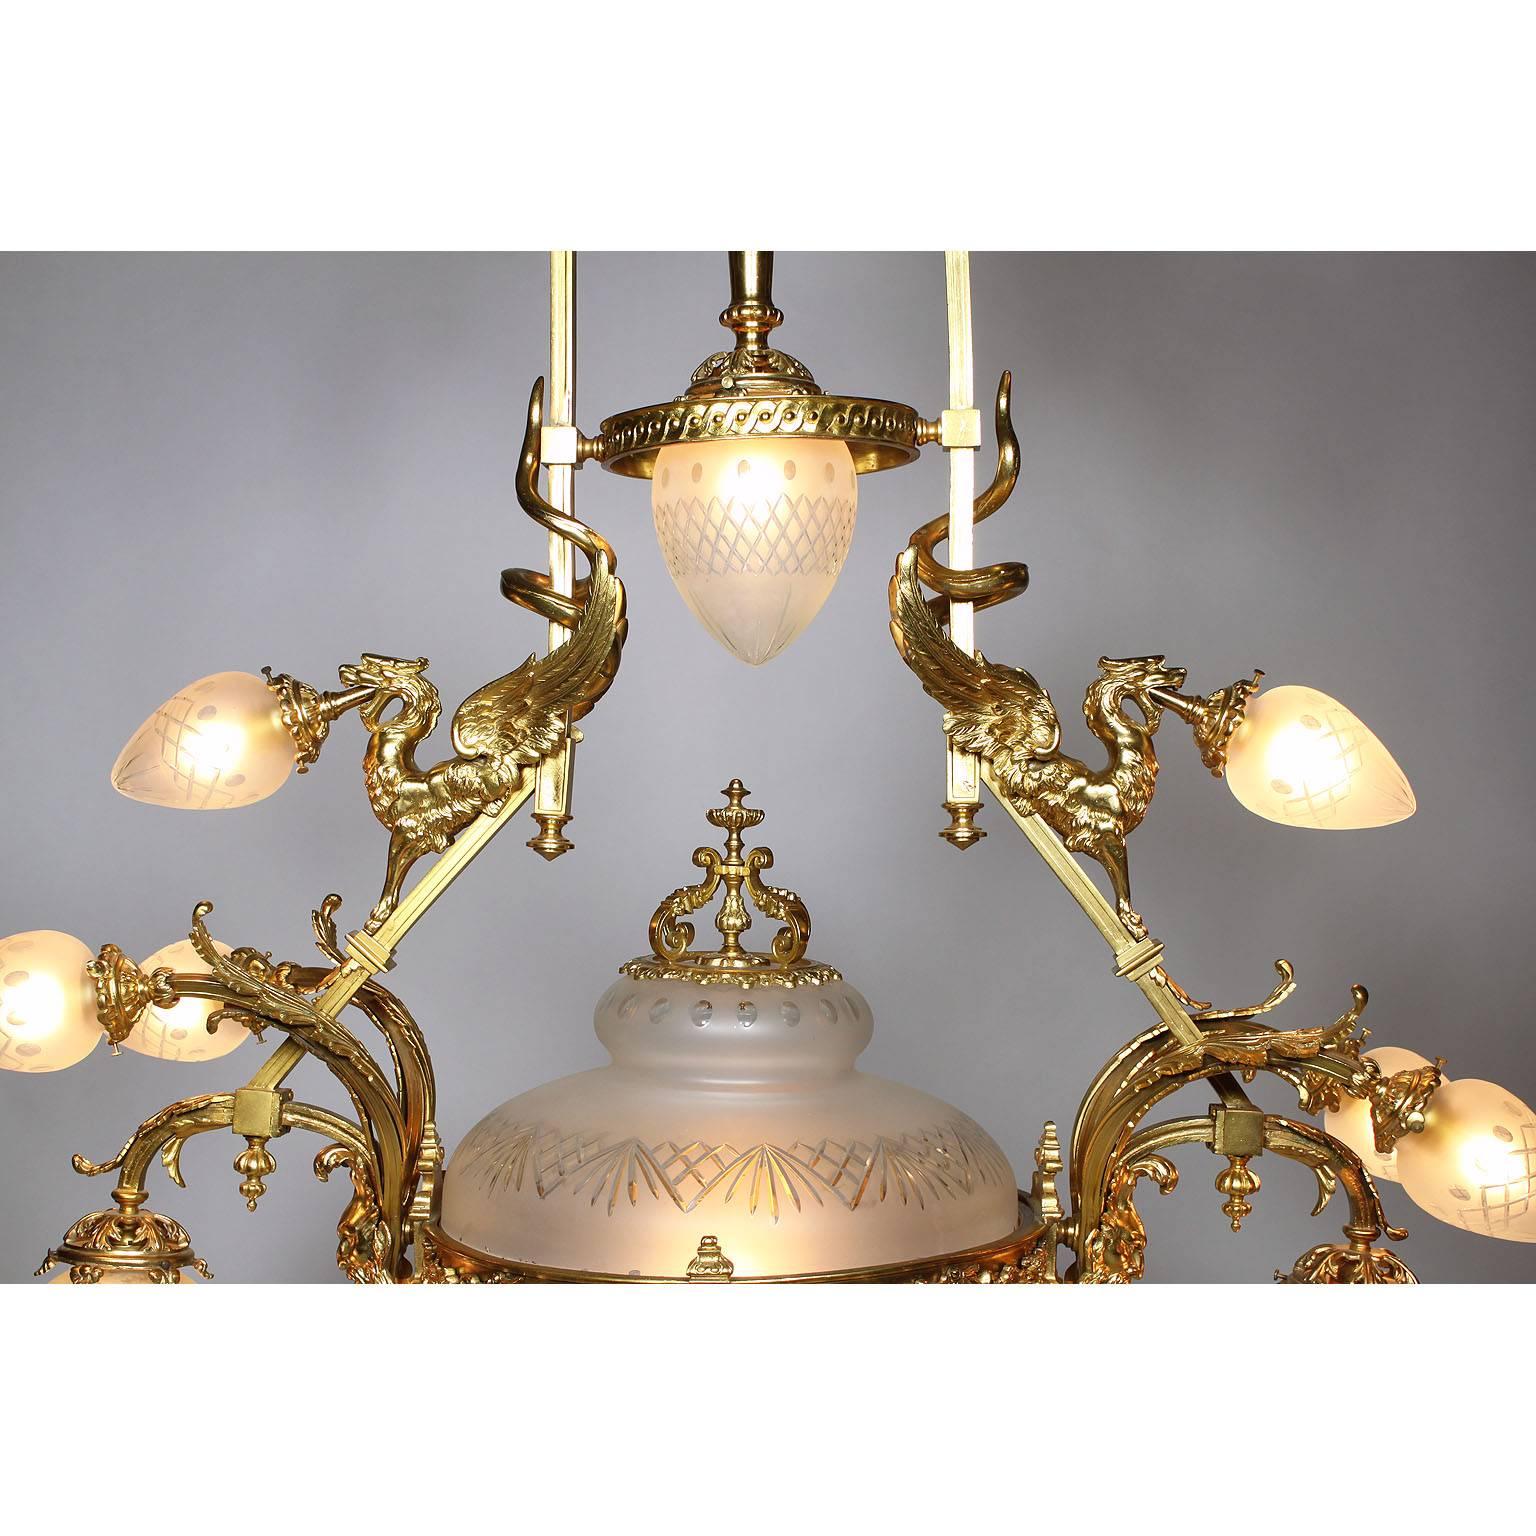 French Belle Epoque 19th-20th Century Neoclassical Style Gilt-Bronze Chandelier In Good Condition For Sale In Los Angeles, CA